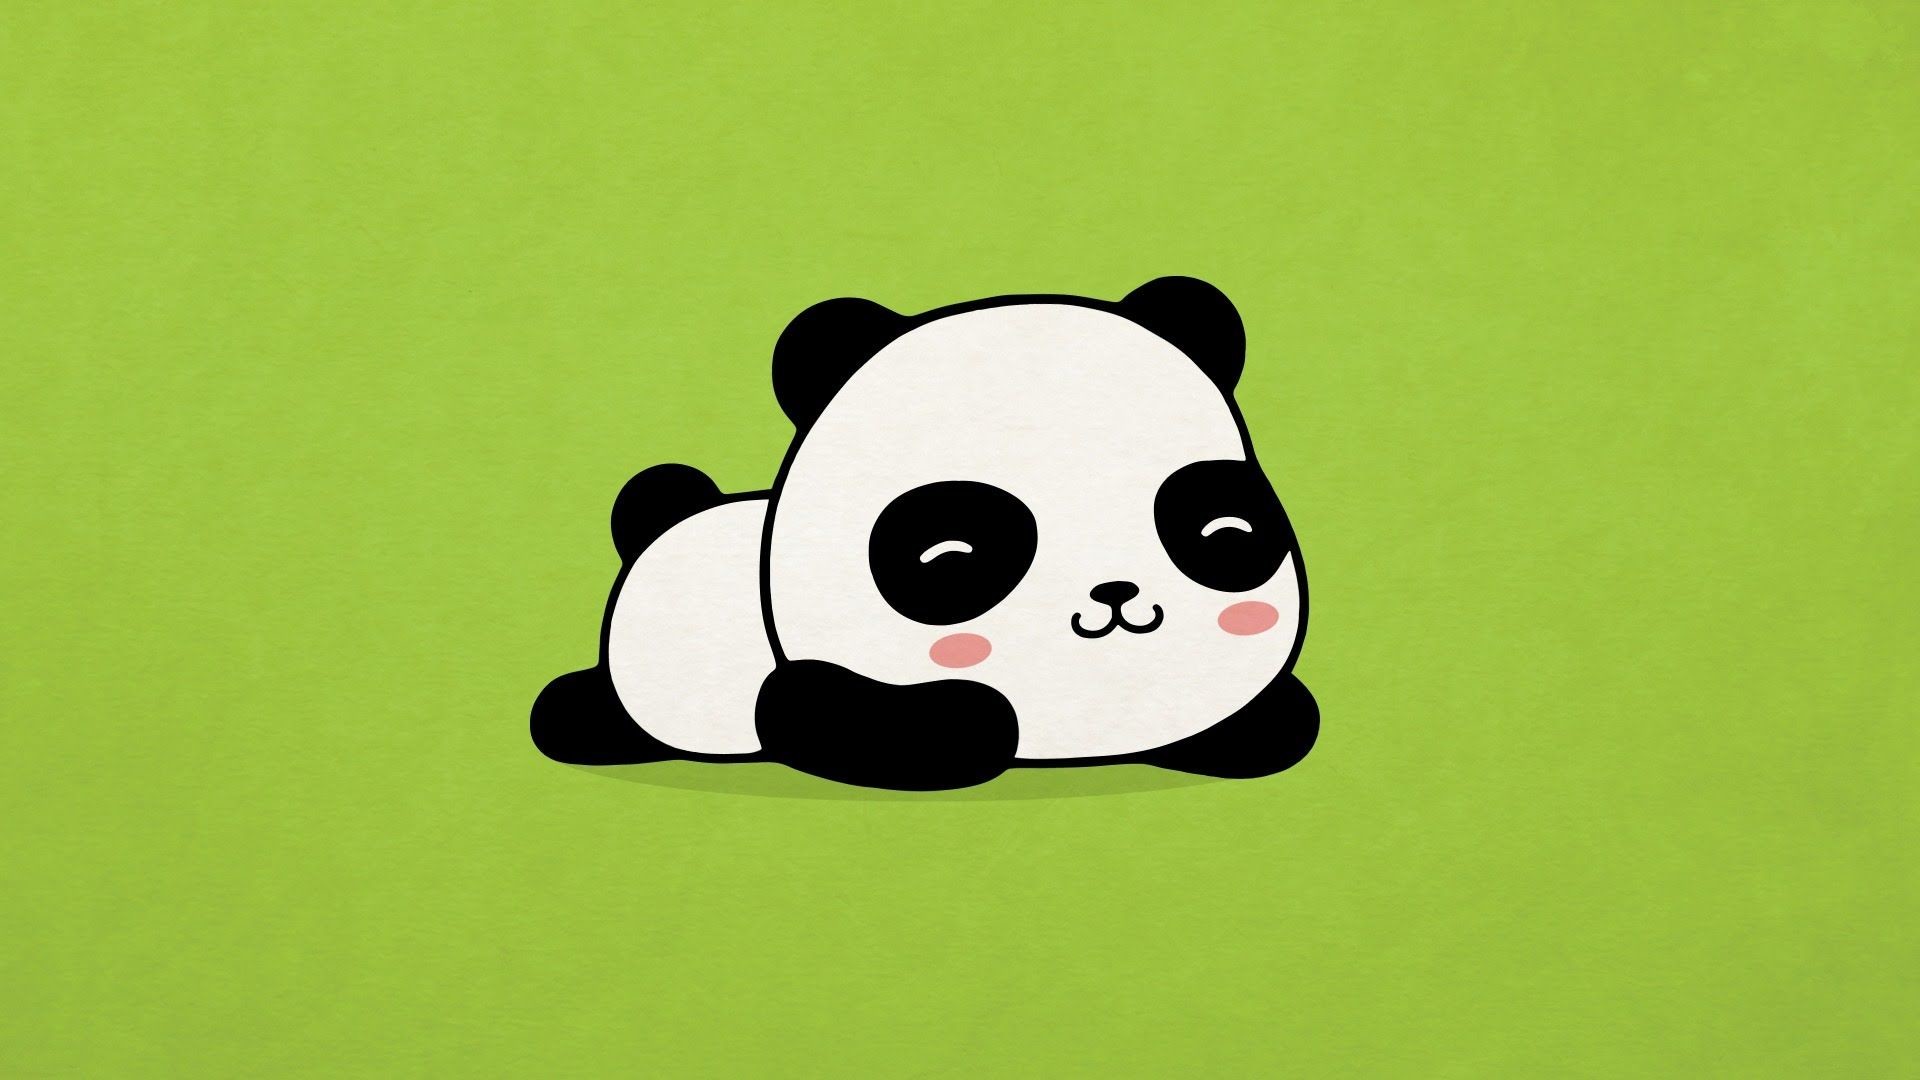 1920x1080 1024x768 Cute Panda Wallpapers, Cute Panda Wallpapers For Free Download  ...">